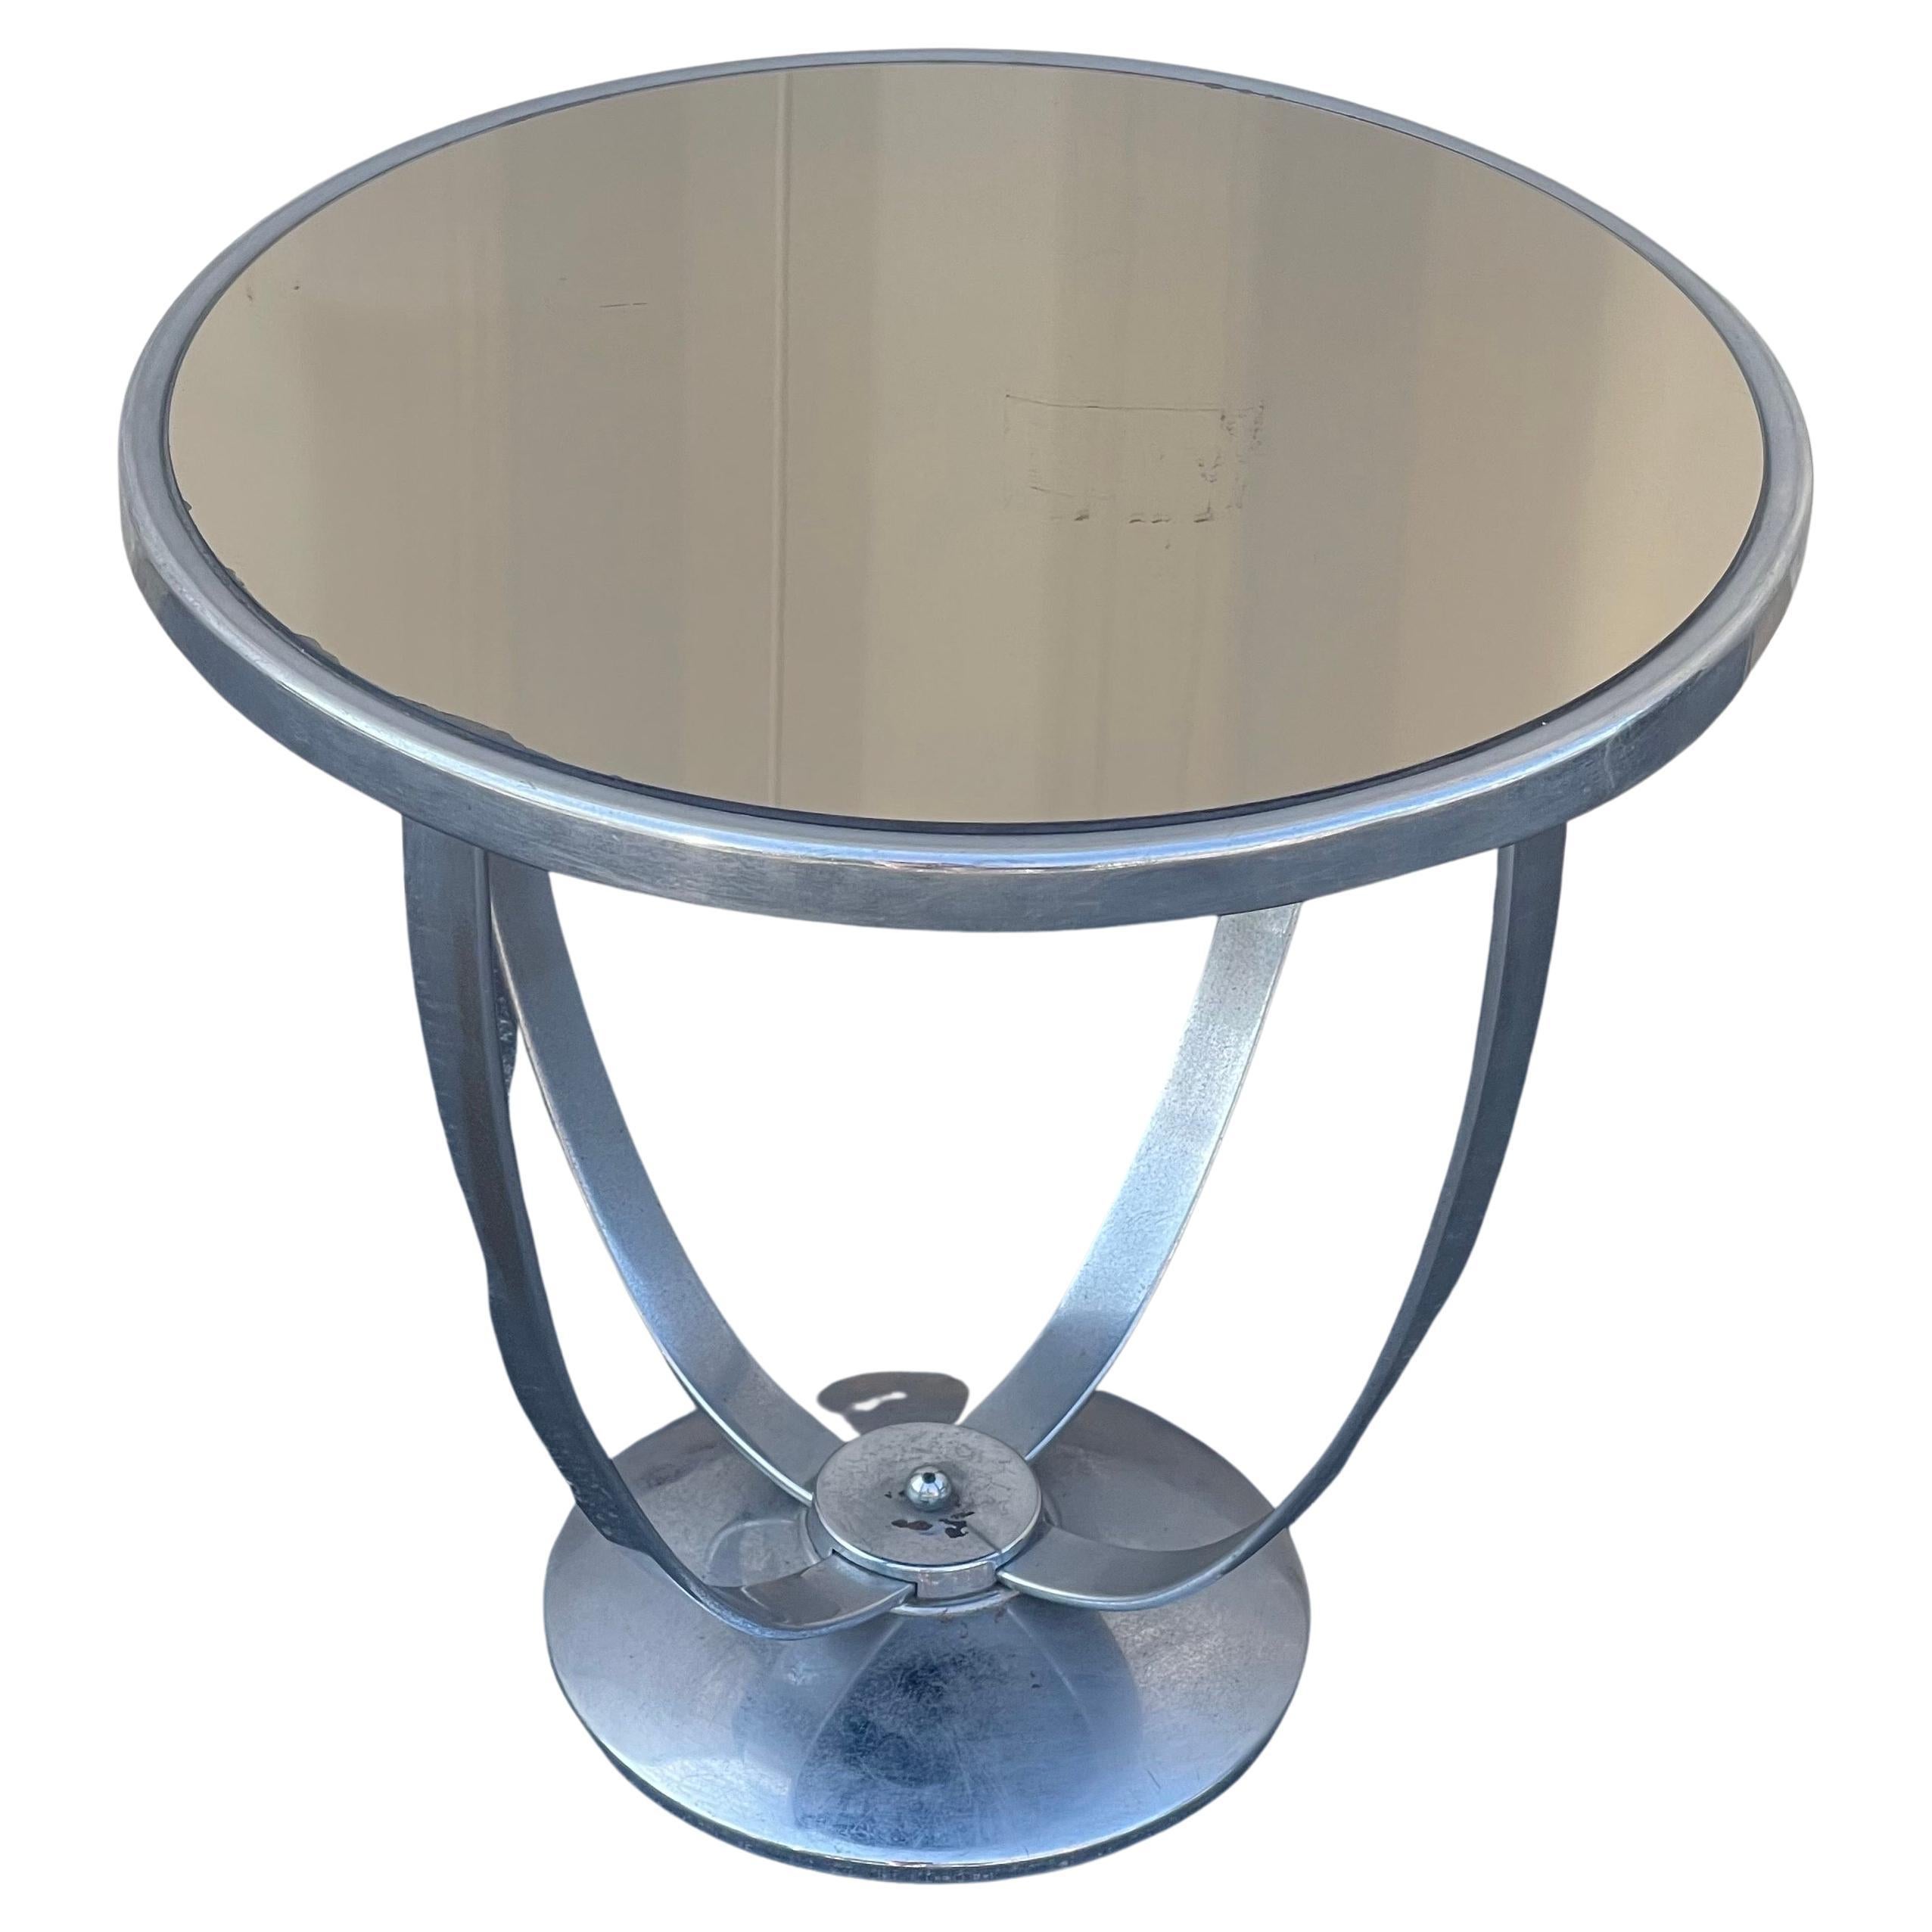 Art Deco Chrome with Mirrored Top Side Table by Wolfgang Hoffman for Howell Co. In Good Condition For Sale In San Diego, CA